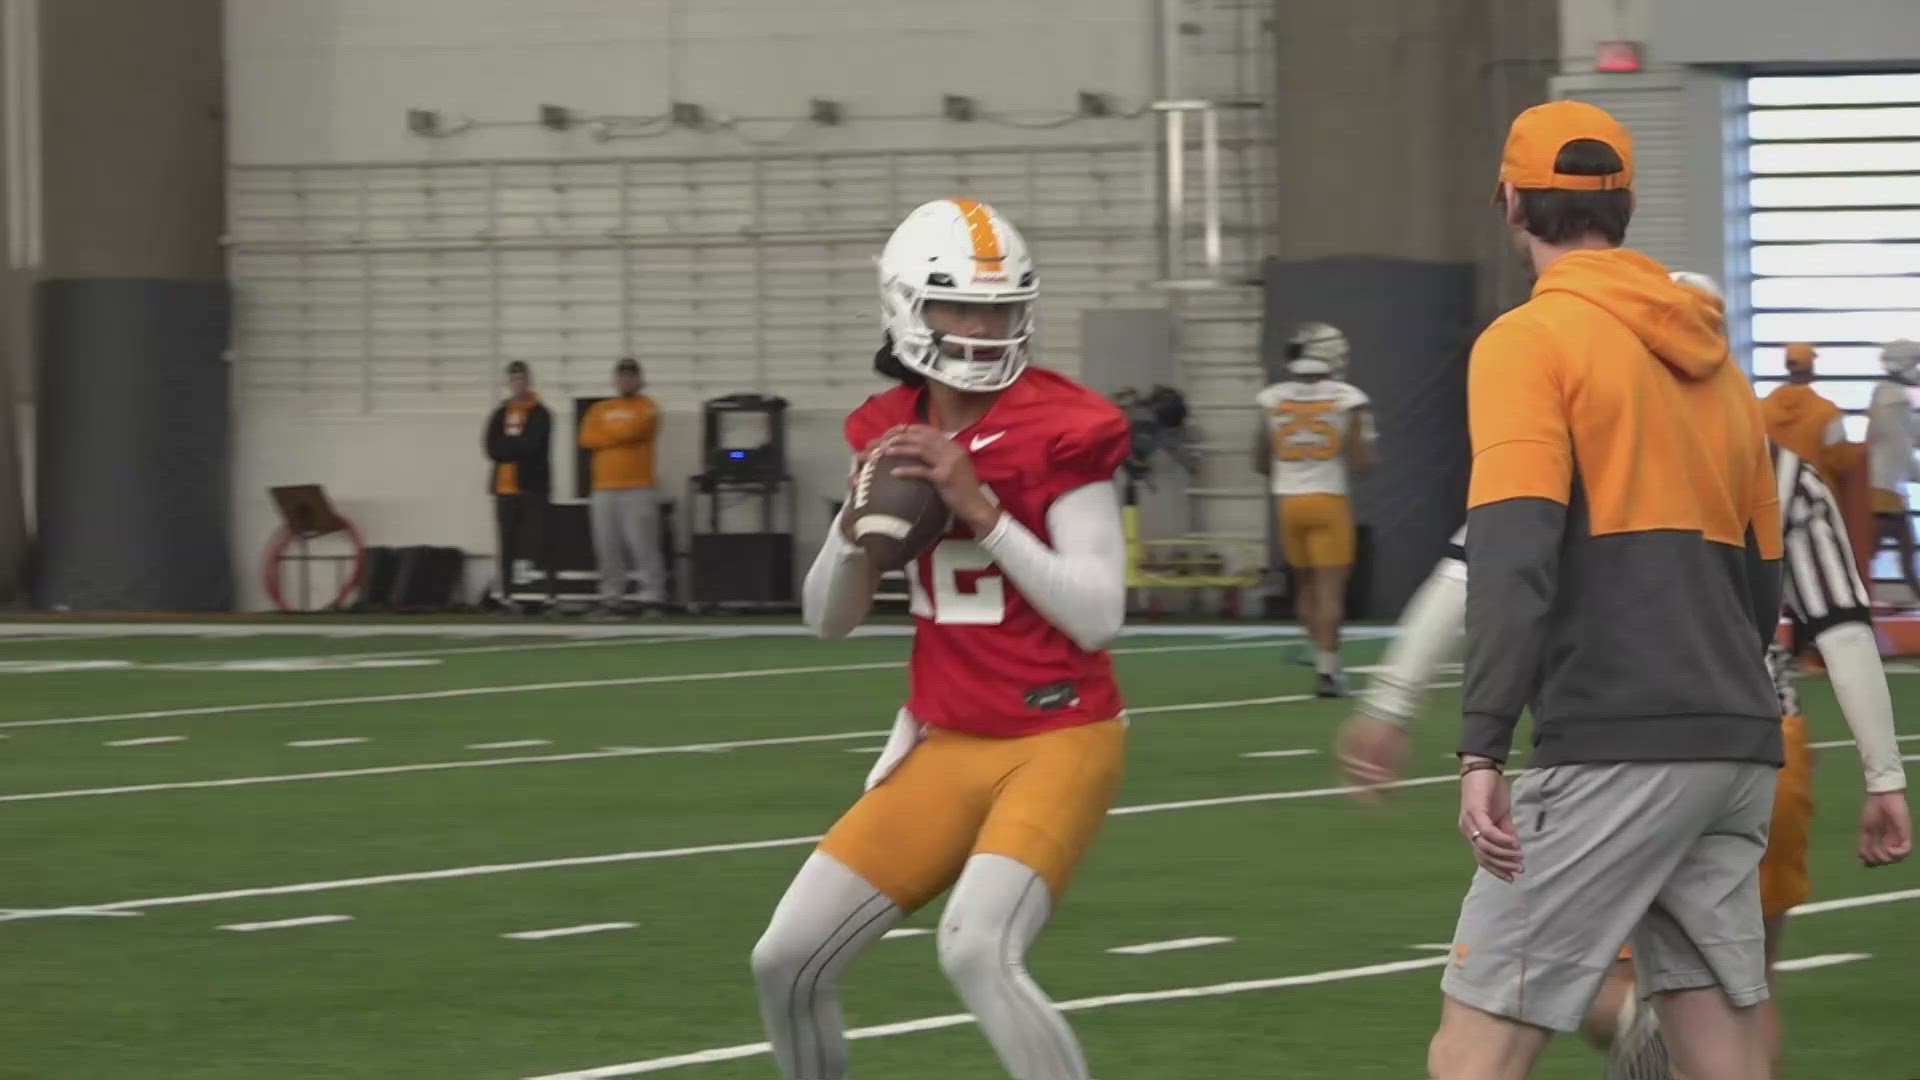 Spring practice is underway for Tennessee football as the team preps for kickoff in the fall.